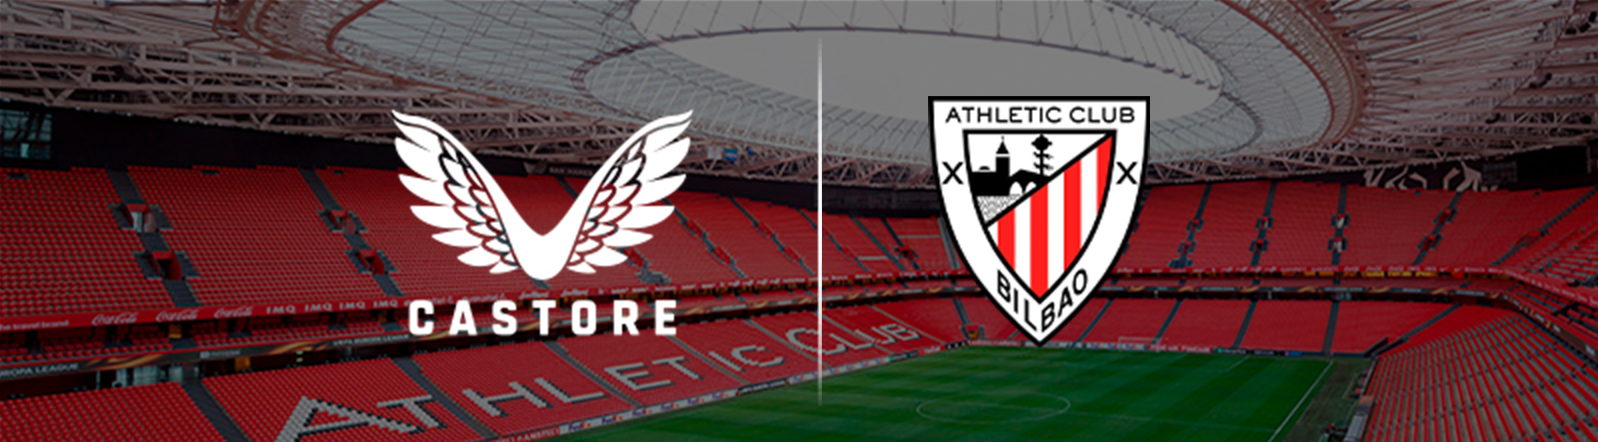 Castore secures multi-year kit partnership with Athletic Club